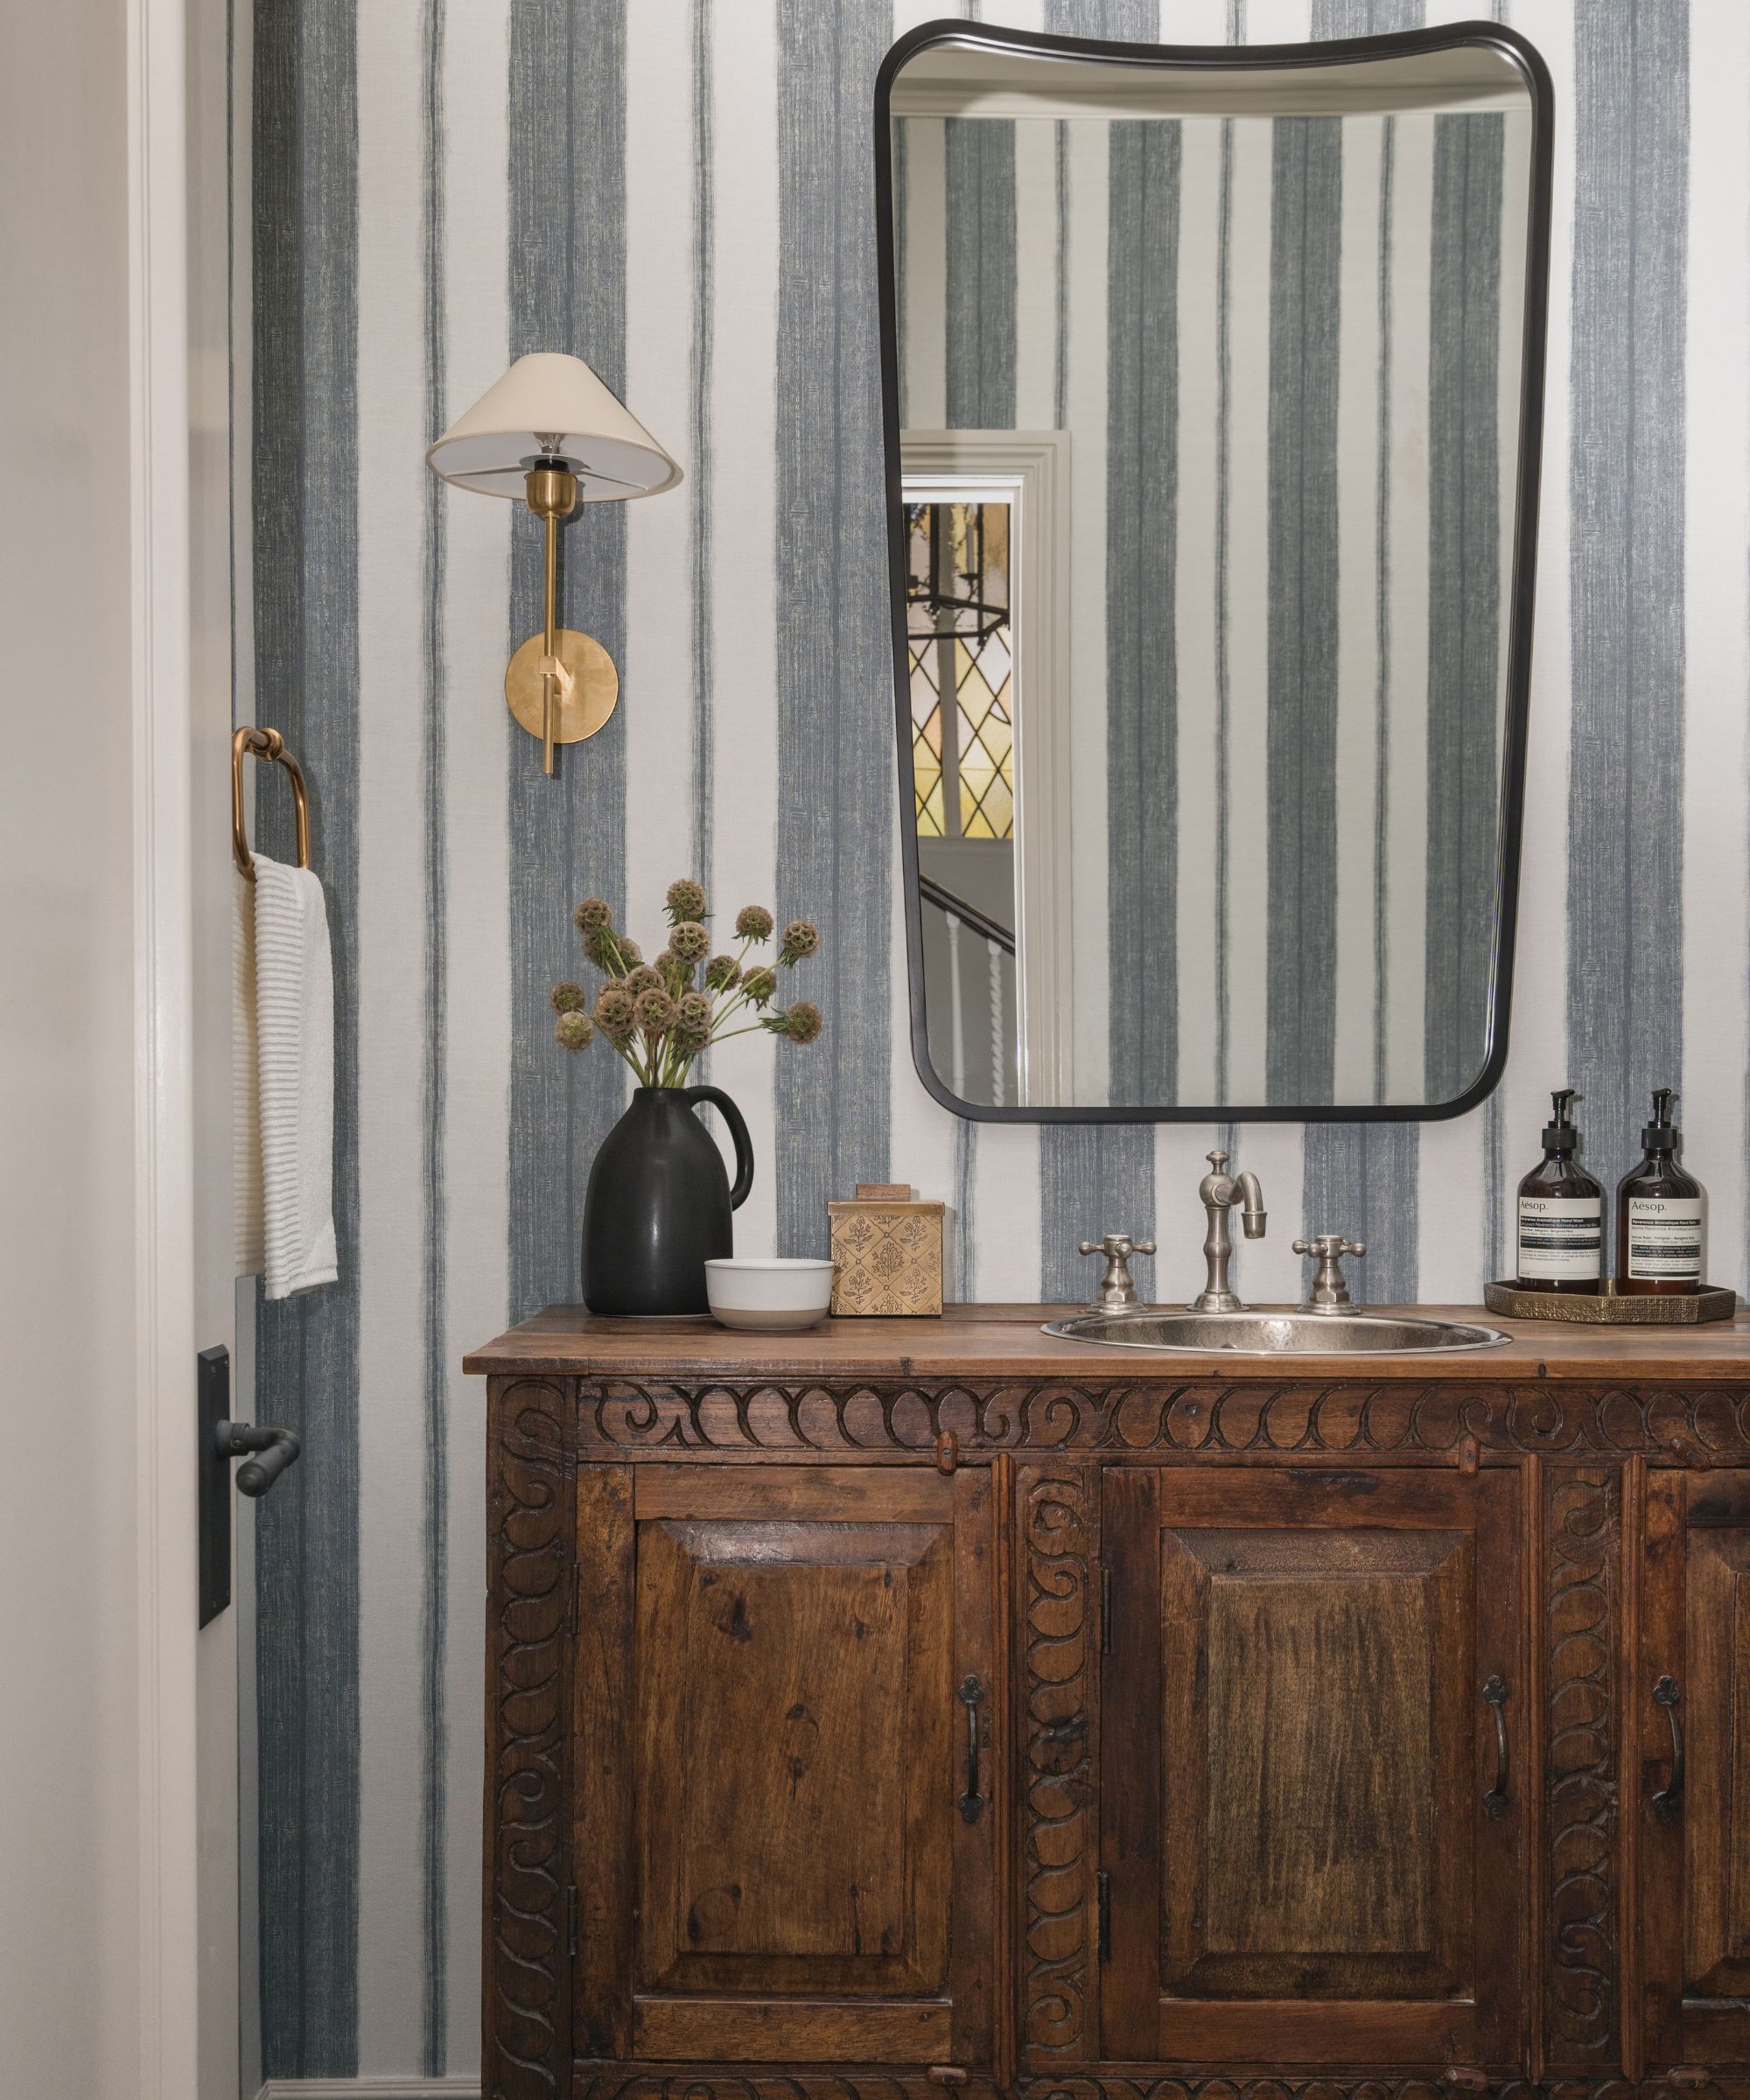 A powder room with dark blue and white striped wallpaper, a large vanity mirror and a vintage wooden dresser